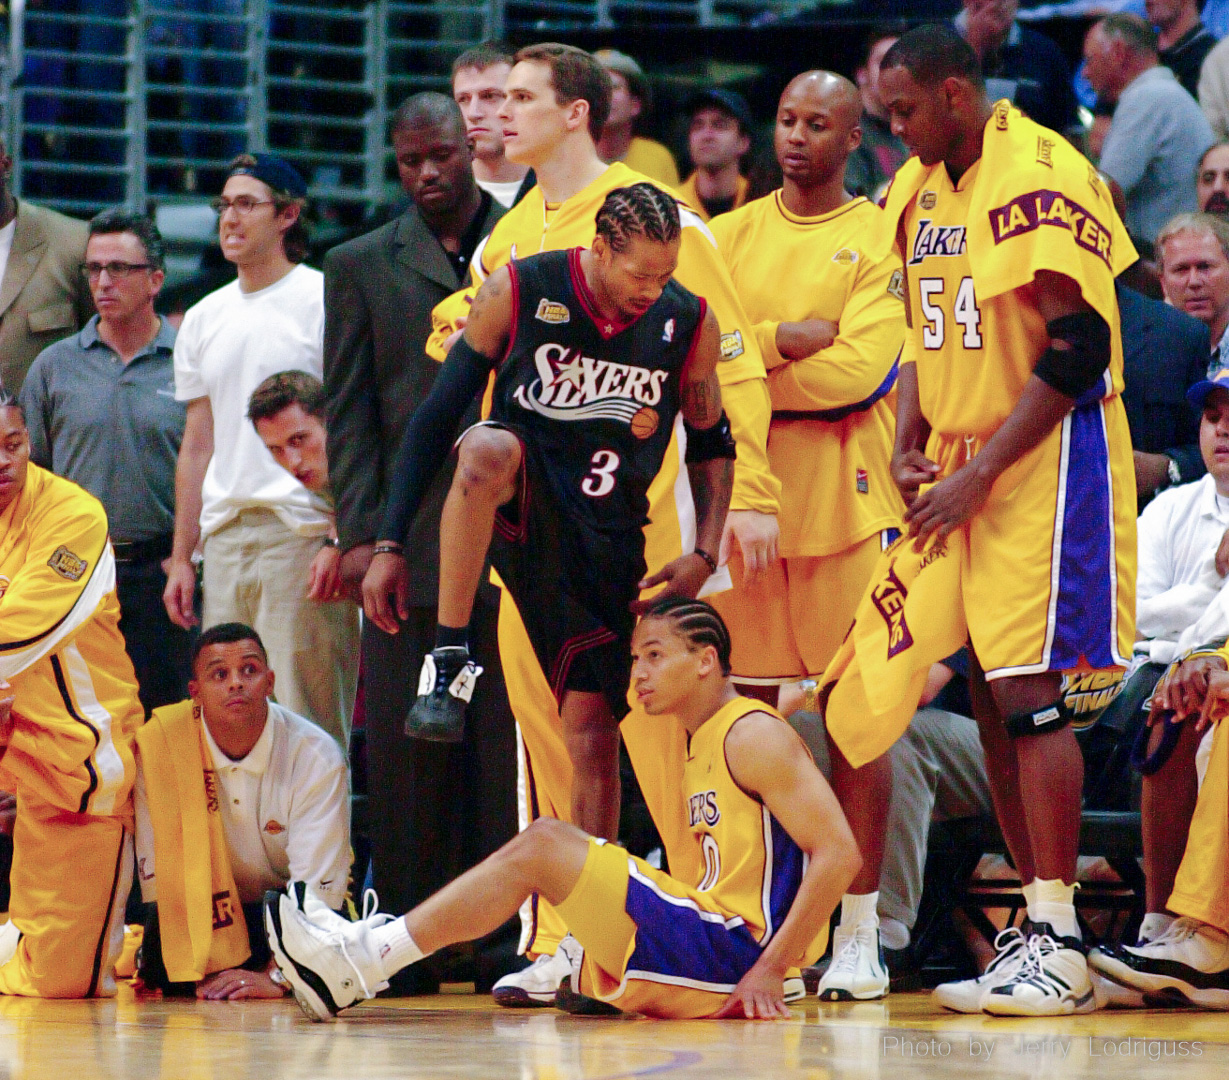 The Philadelphia 76ers Allen Iverson famously steps over the Los Angeles Lakers Tyronn Lue with cold disregard after draining a three-pointer to put the Sixers up by 103-99 with 39.2 seconds left in overtime of the Sixers surprising win over the Lakers in game 1 of the NBA Championship Finals in Los Angeles on June 6, 2001.